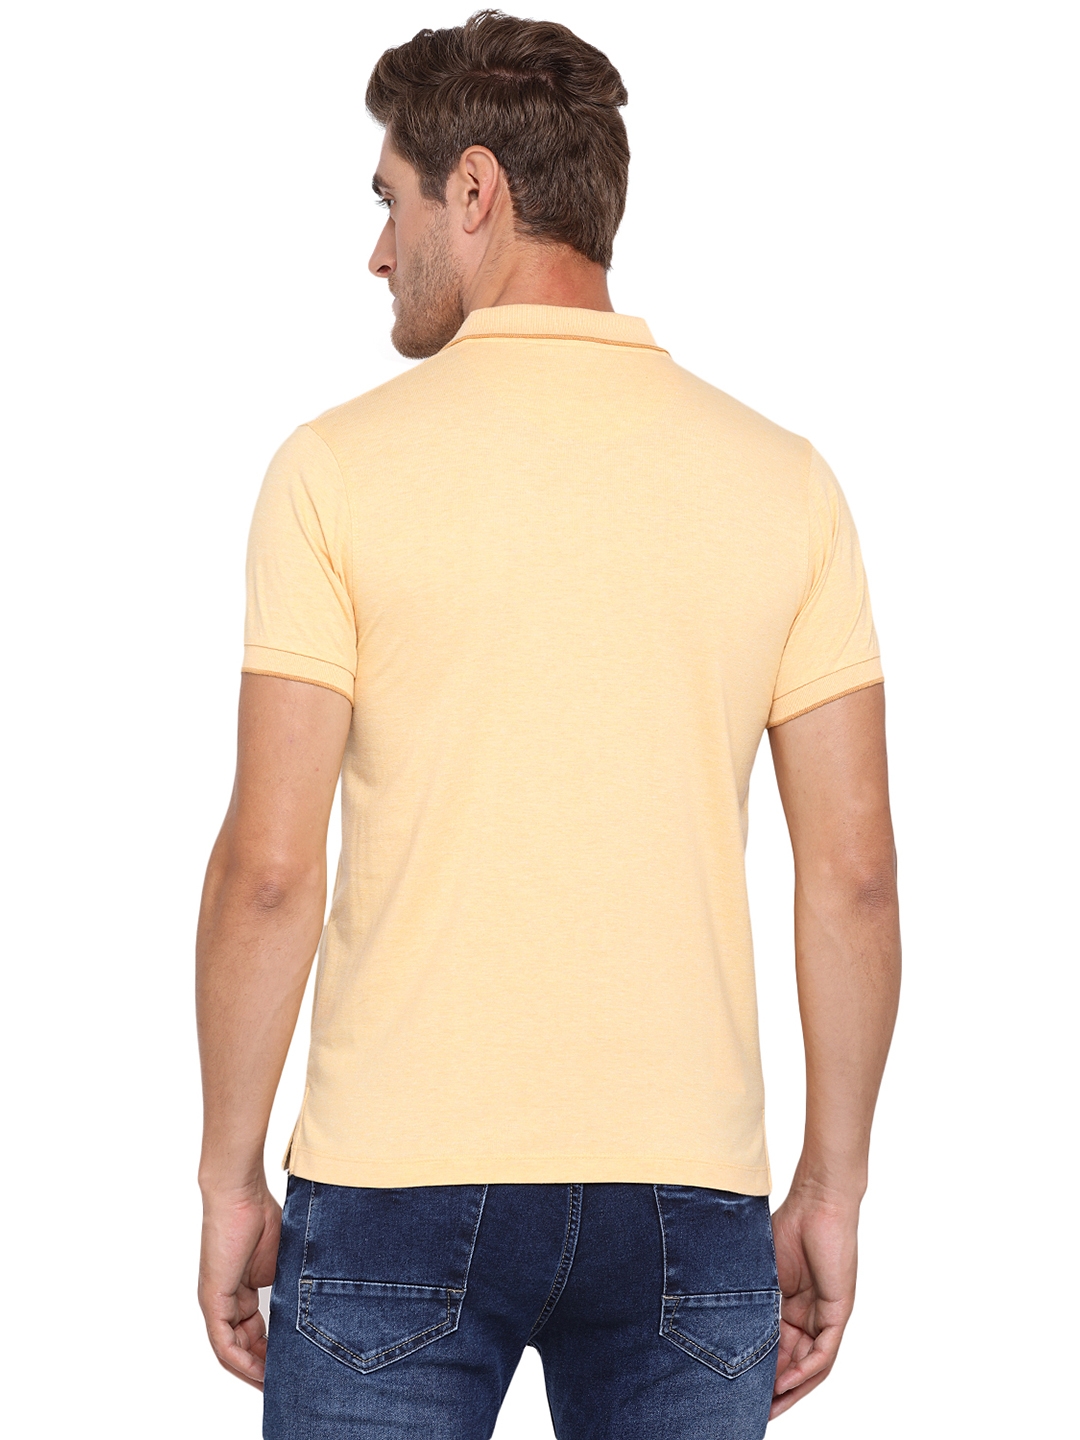 Greenfibre | Light Yellow Solid Slim Fit Polo T-Shirt | Greenfibre 4